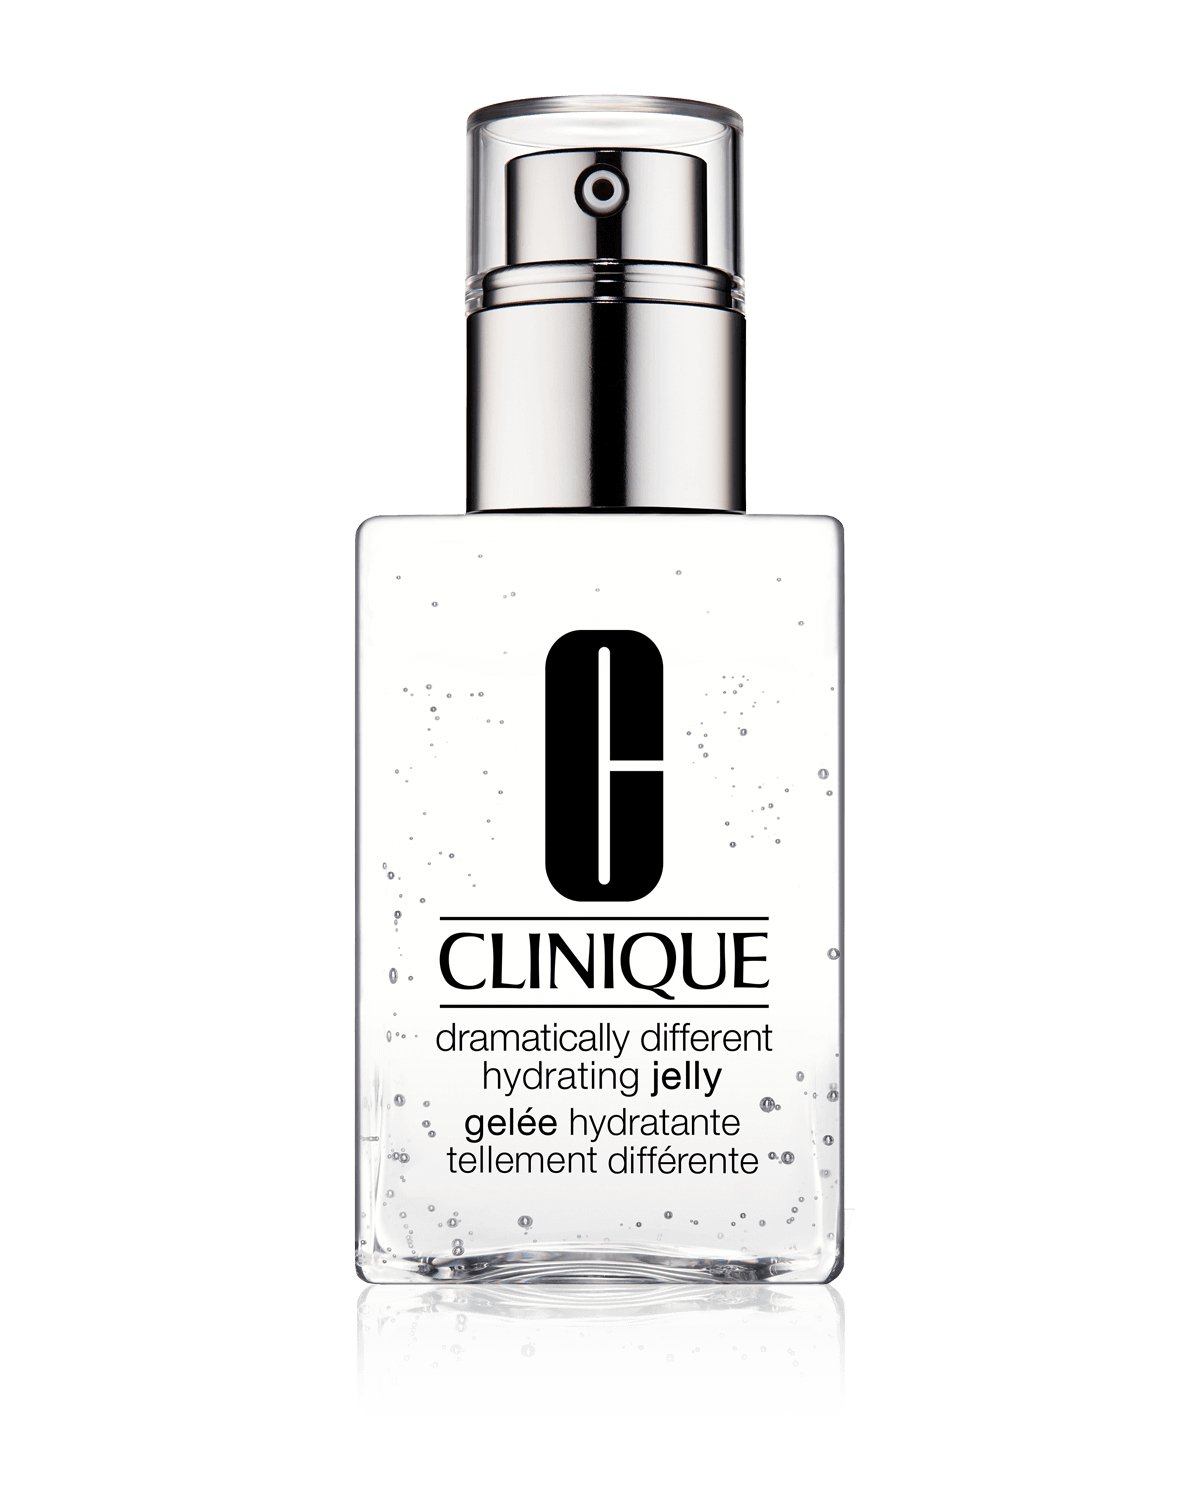 Clinique Dramatically Different Hydrating Jelly 30Ml - AllurebeautypkClinique Dramatically Different Hydrating Jelly 30Ml